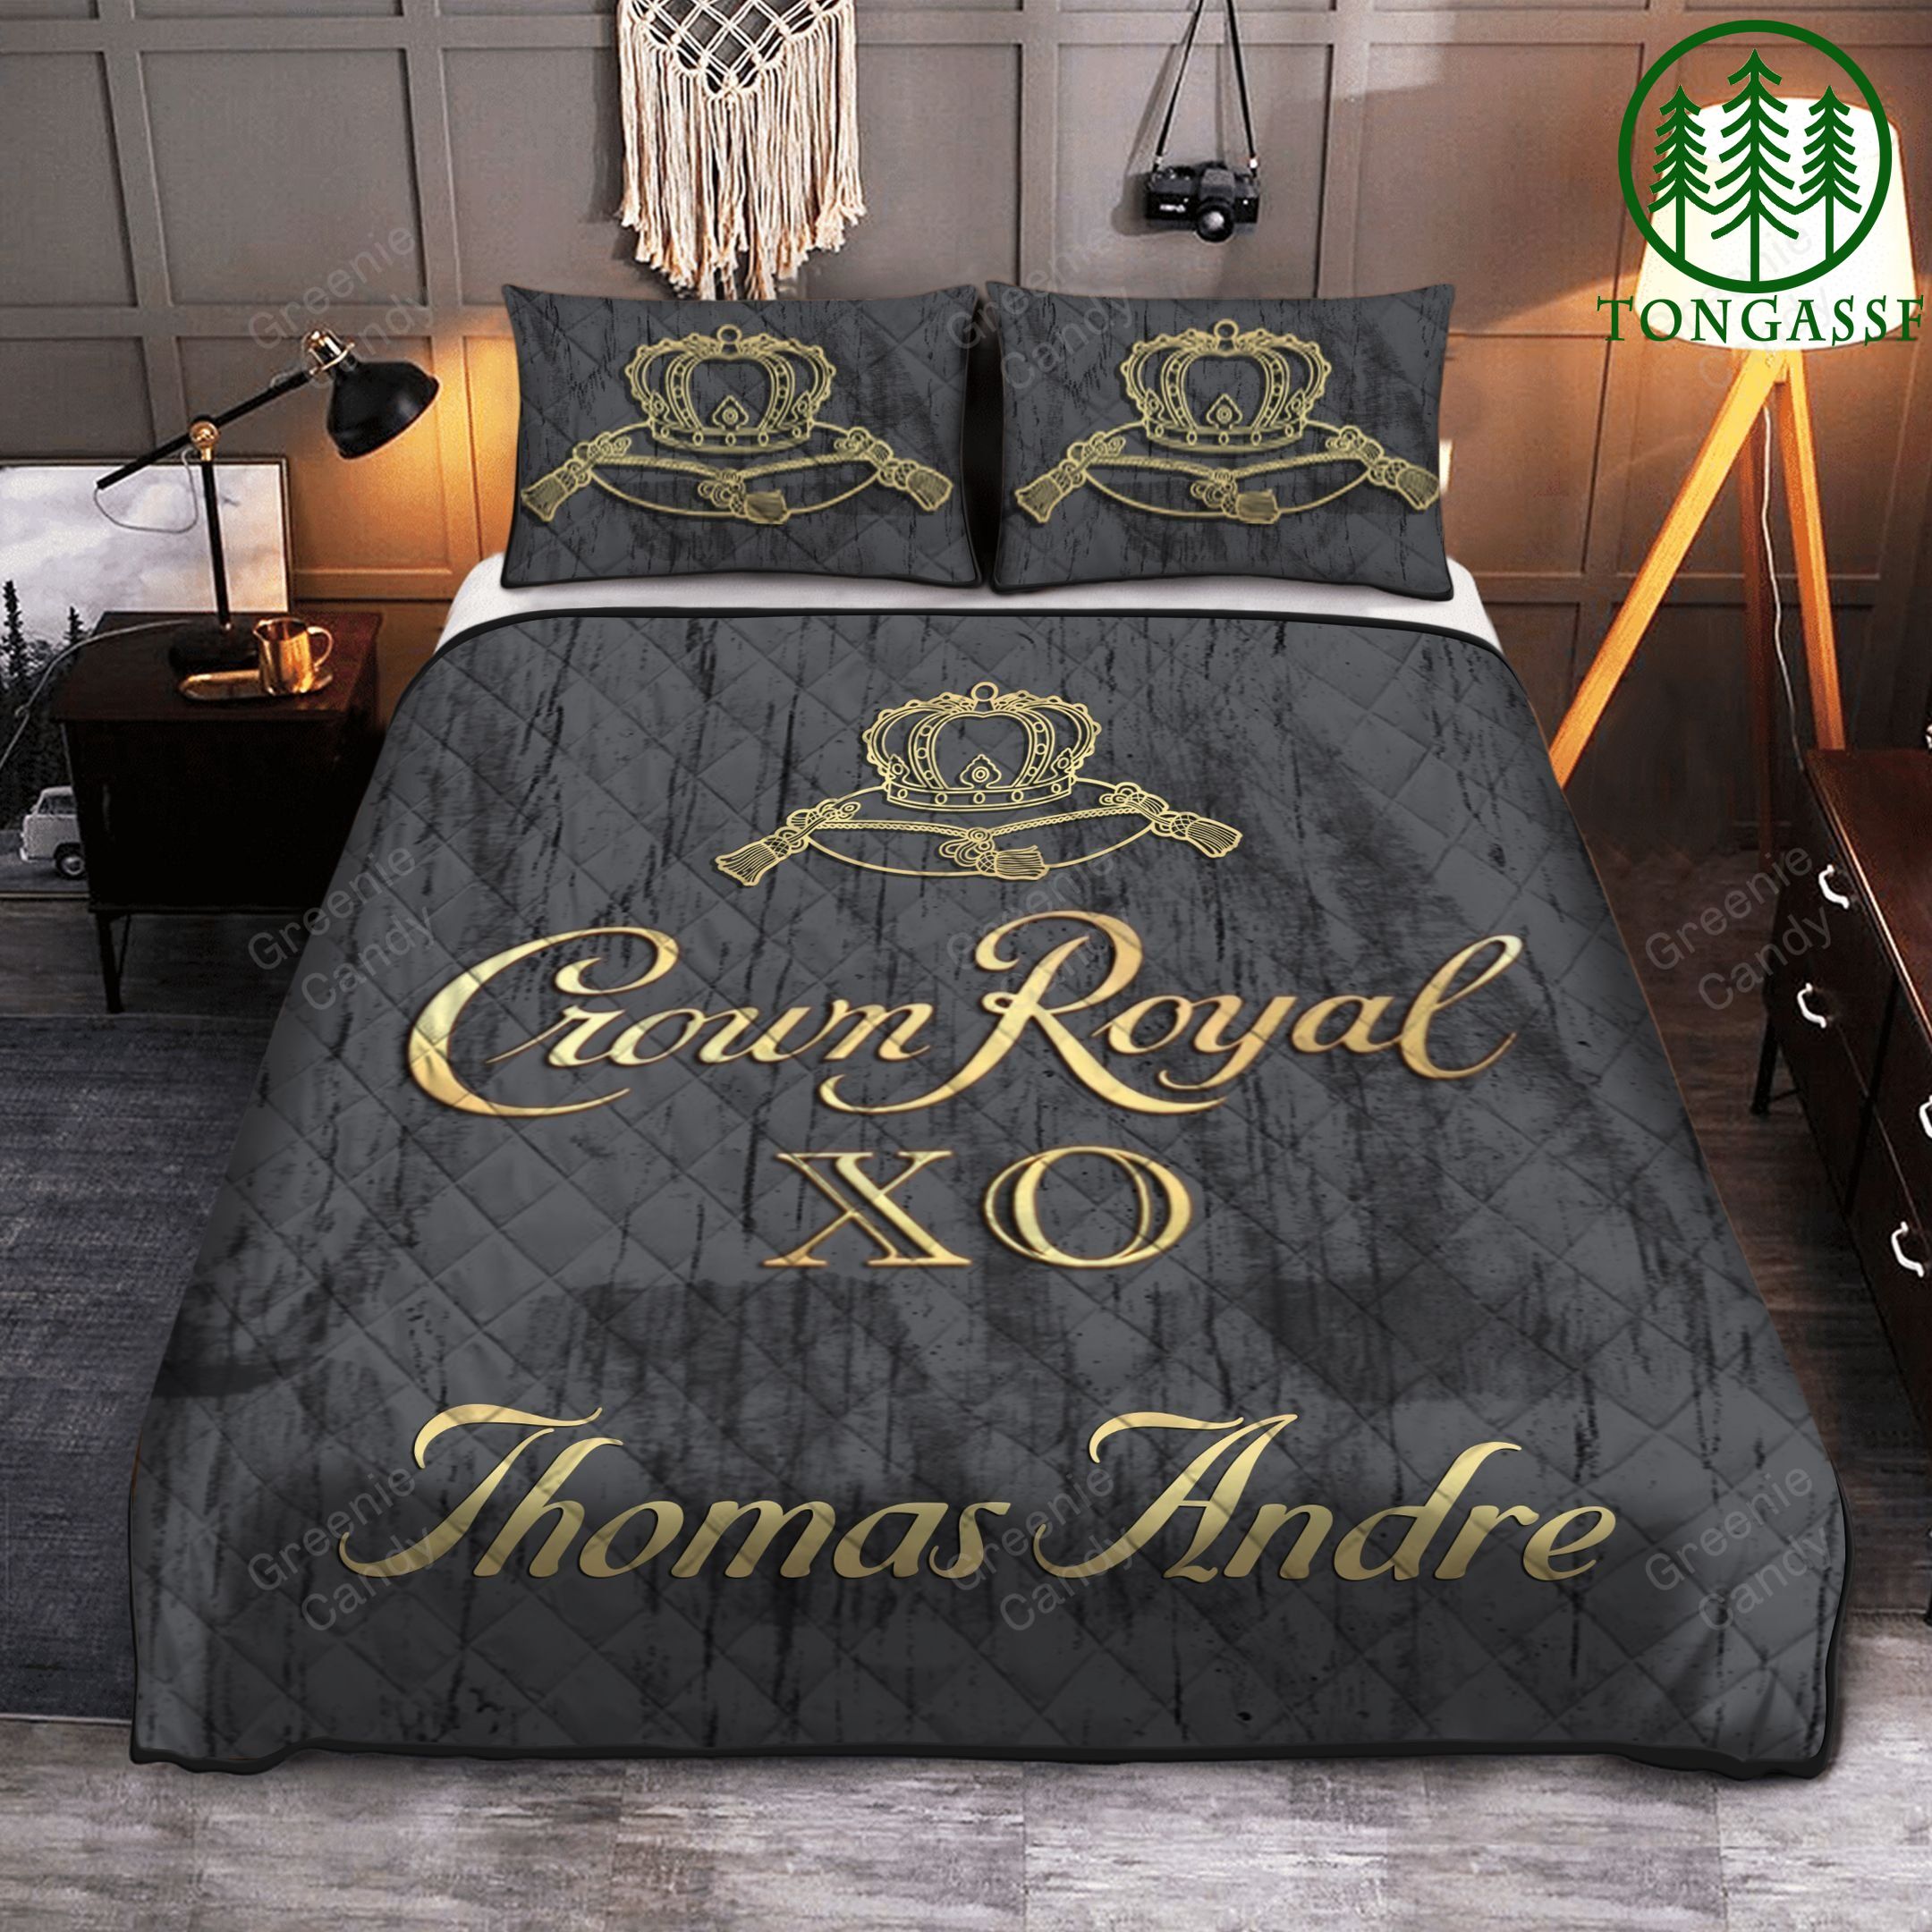 Personalized Whiskey Crown Royal XO Quilt Bedding Set